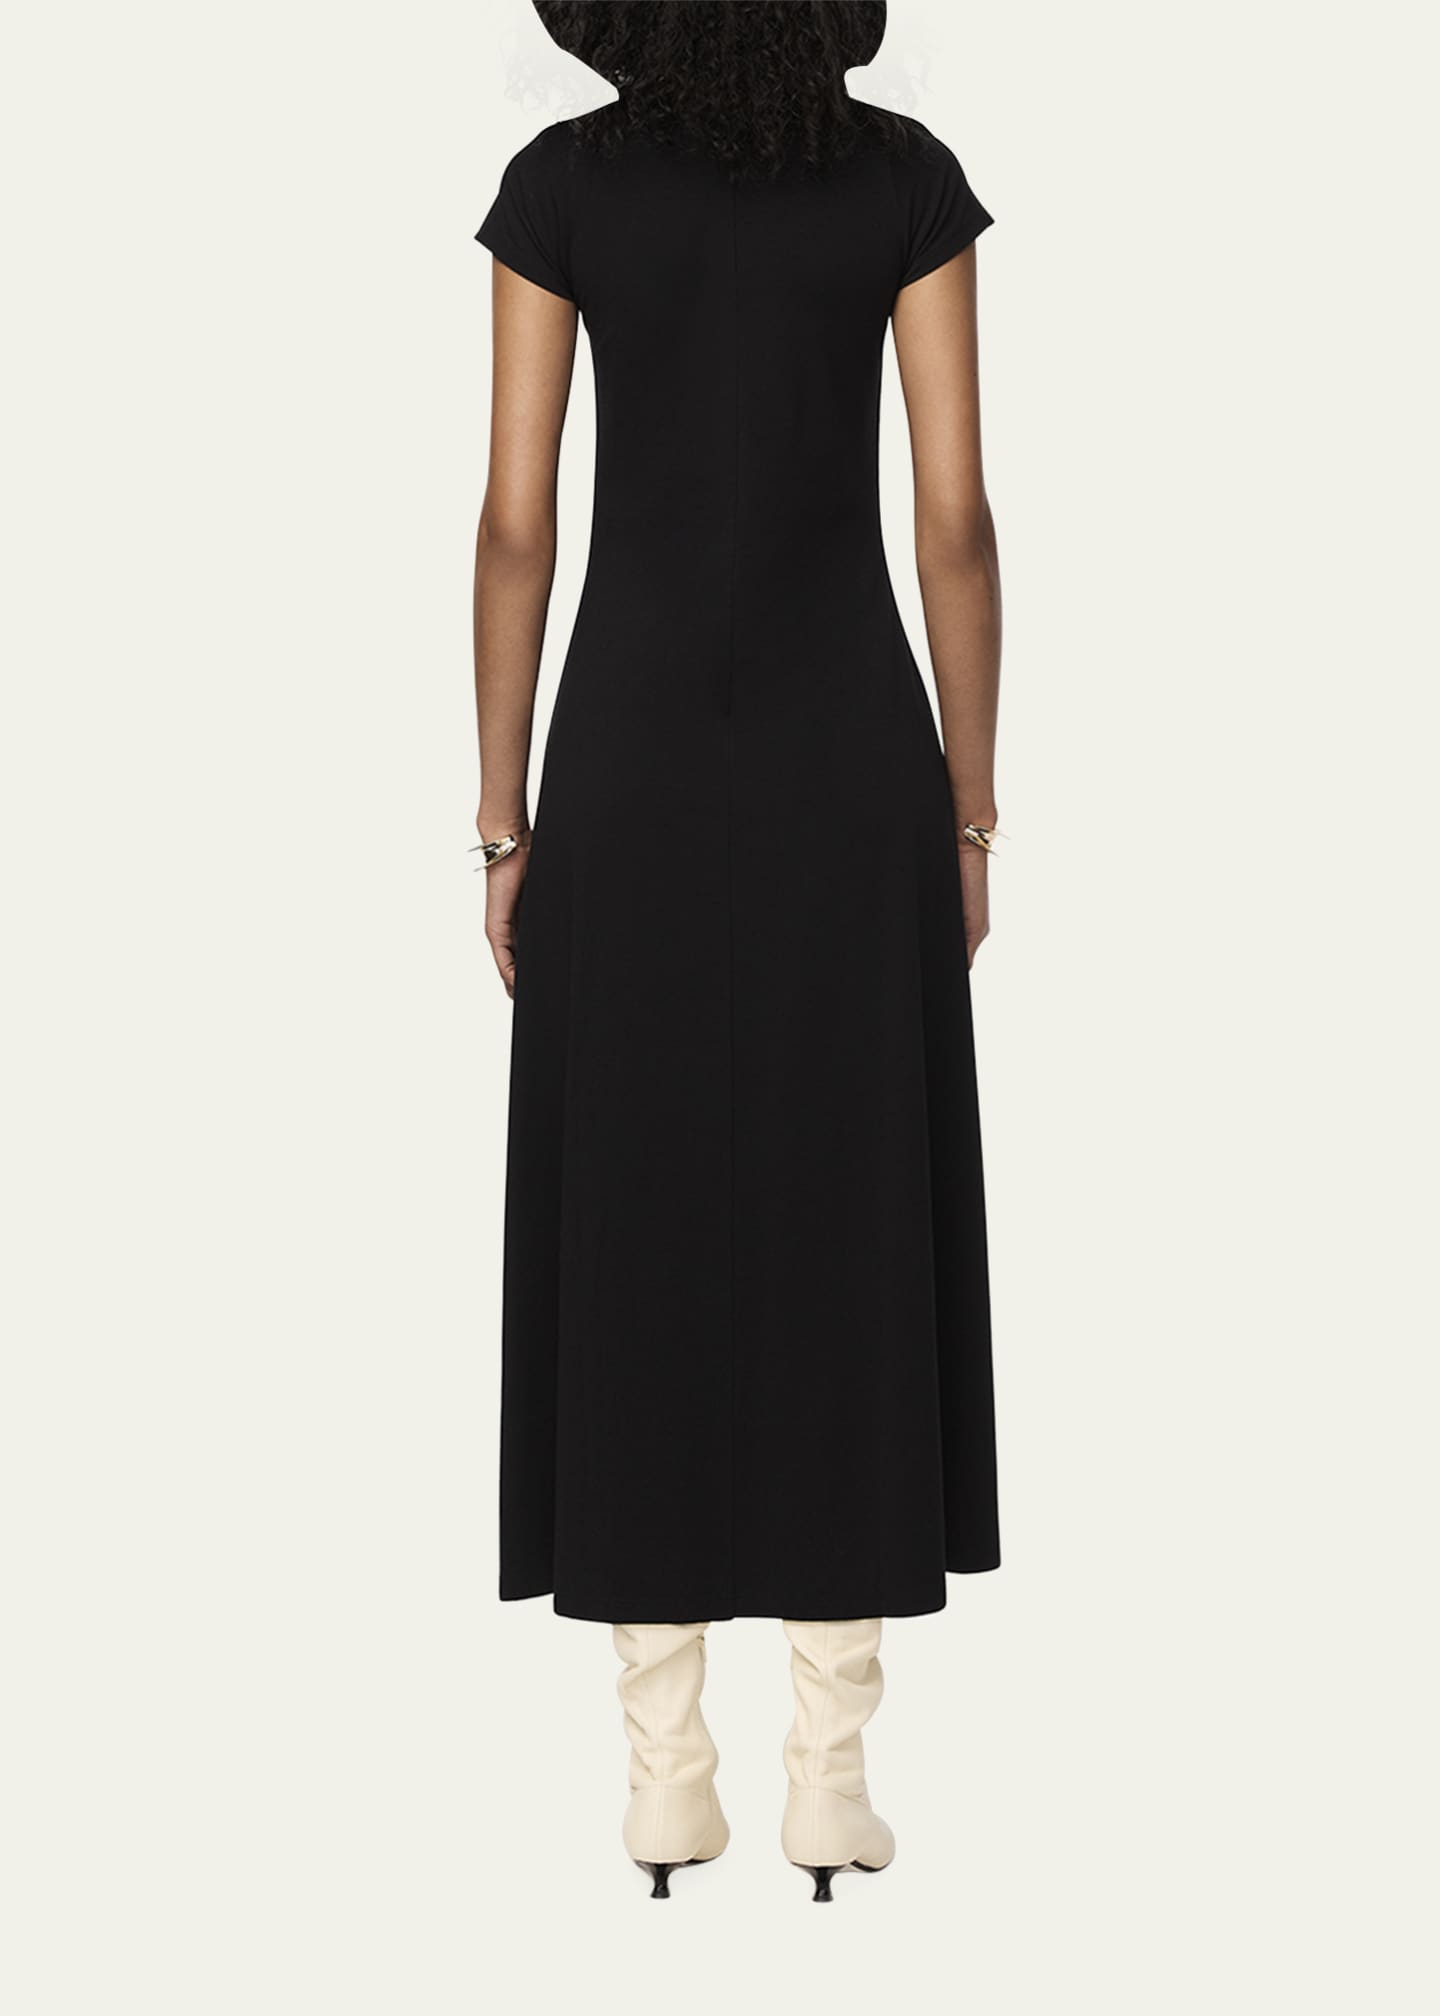 Another Tomorrow Cotton Fitted Tee Dress - Bergdorf Goodman